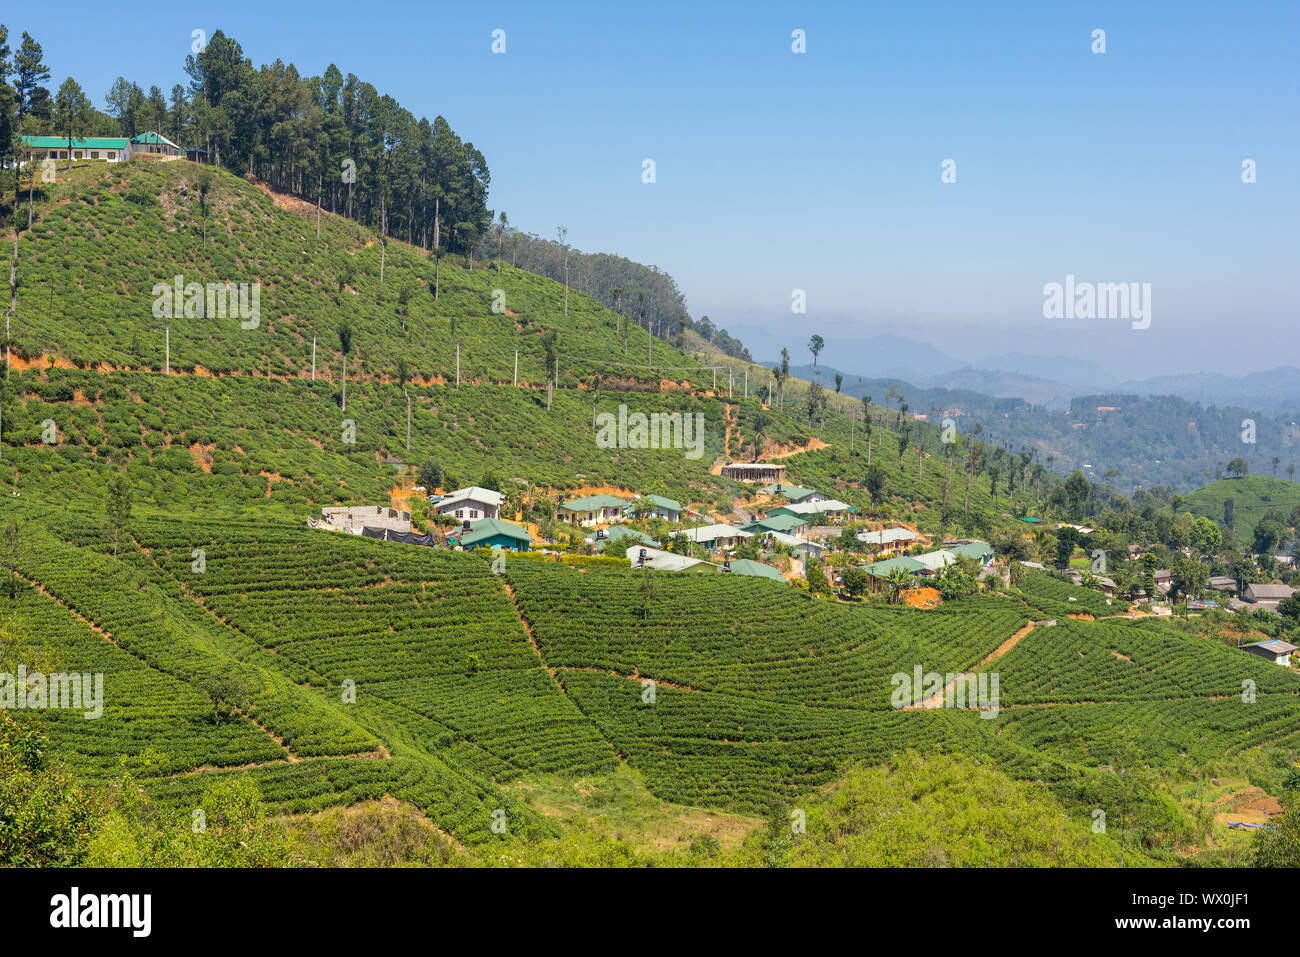 Company town in middle of the tea plantations in the highlands of Sri Lanka Stock Photo